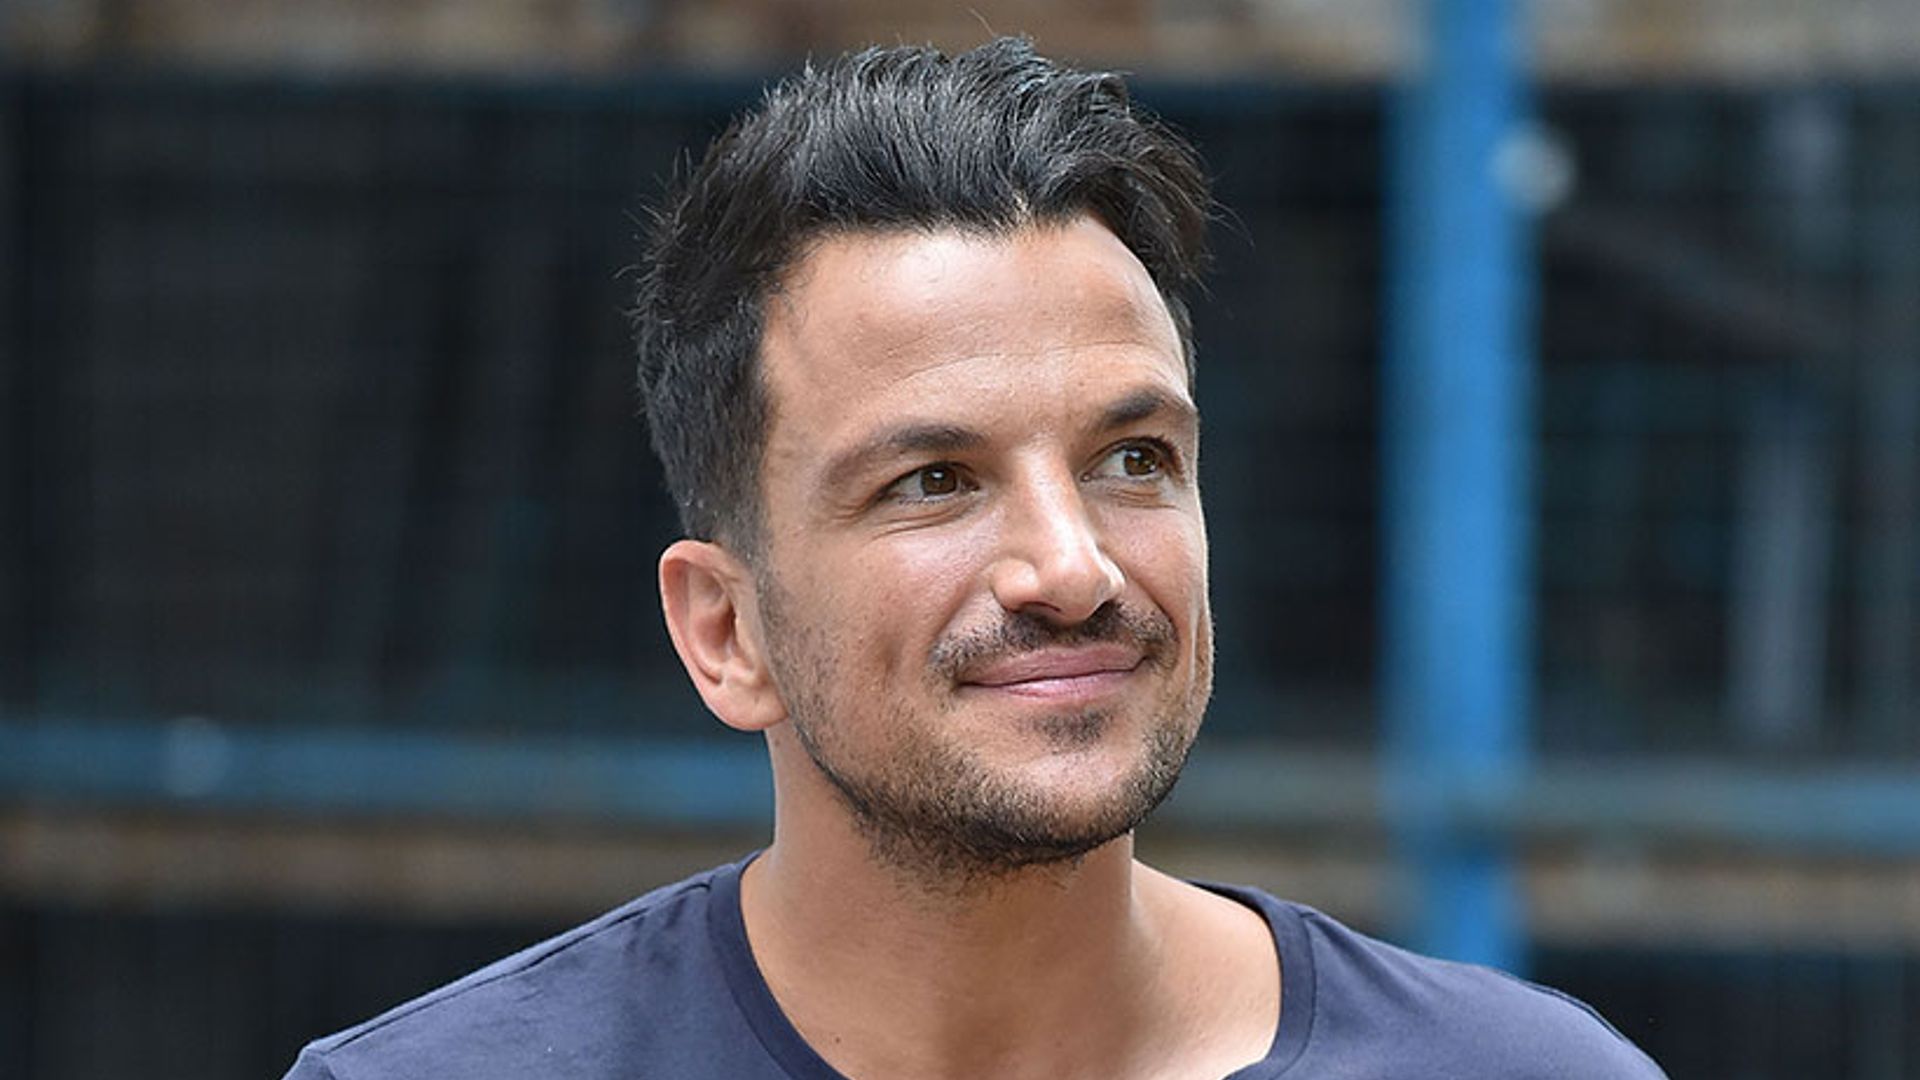 peter-andre-son-theo